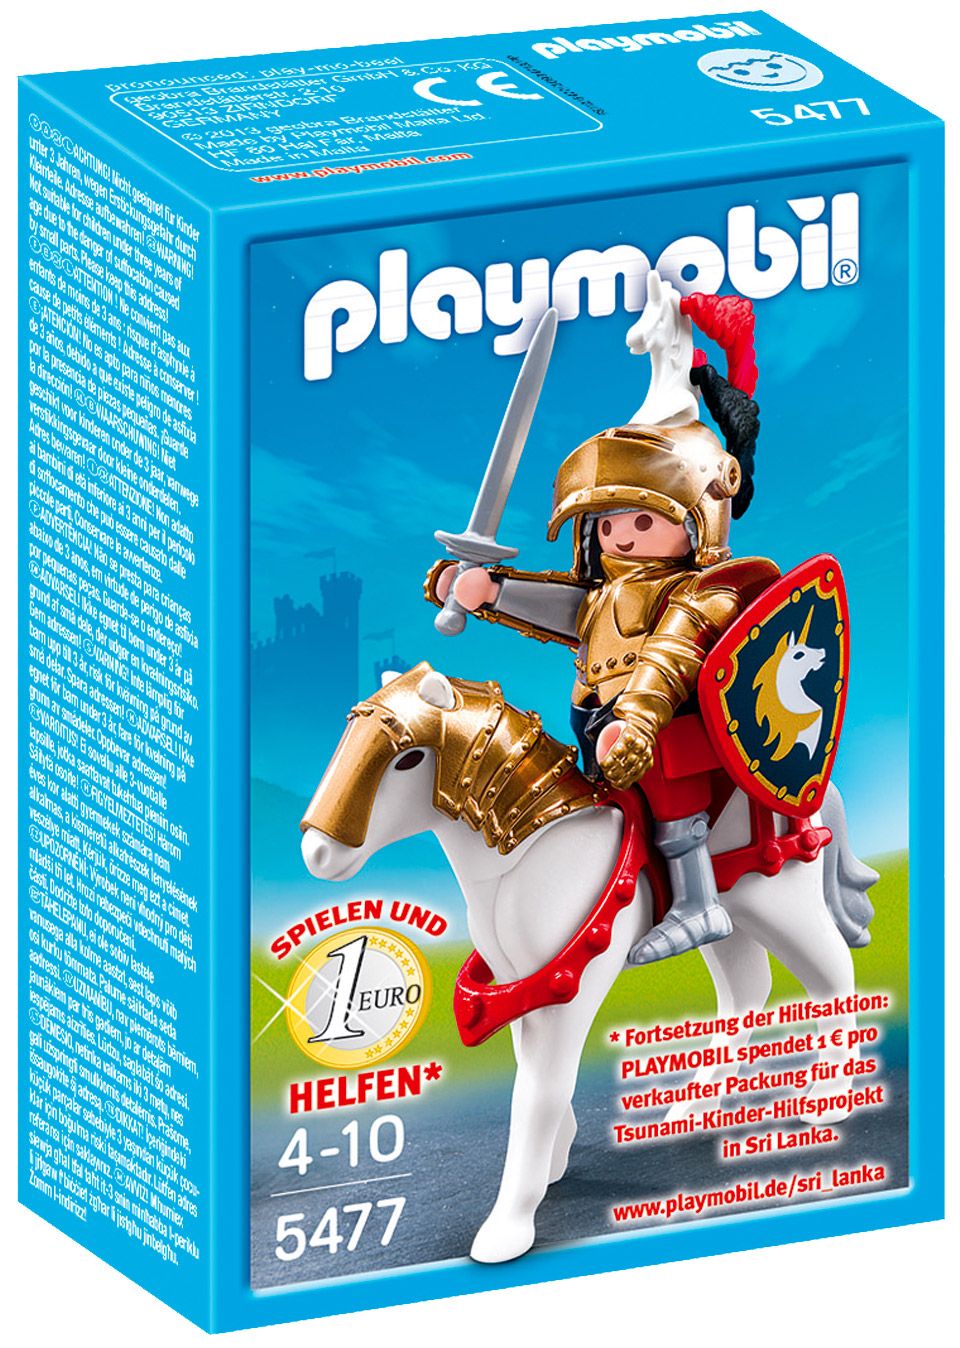 Playmobil Knights 5477 pas cher, Chevalier d'Or et son cheval